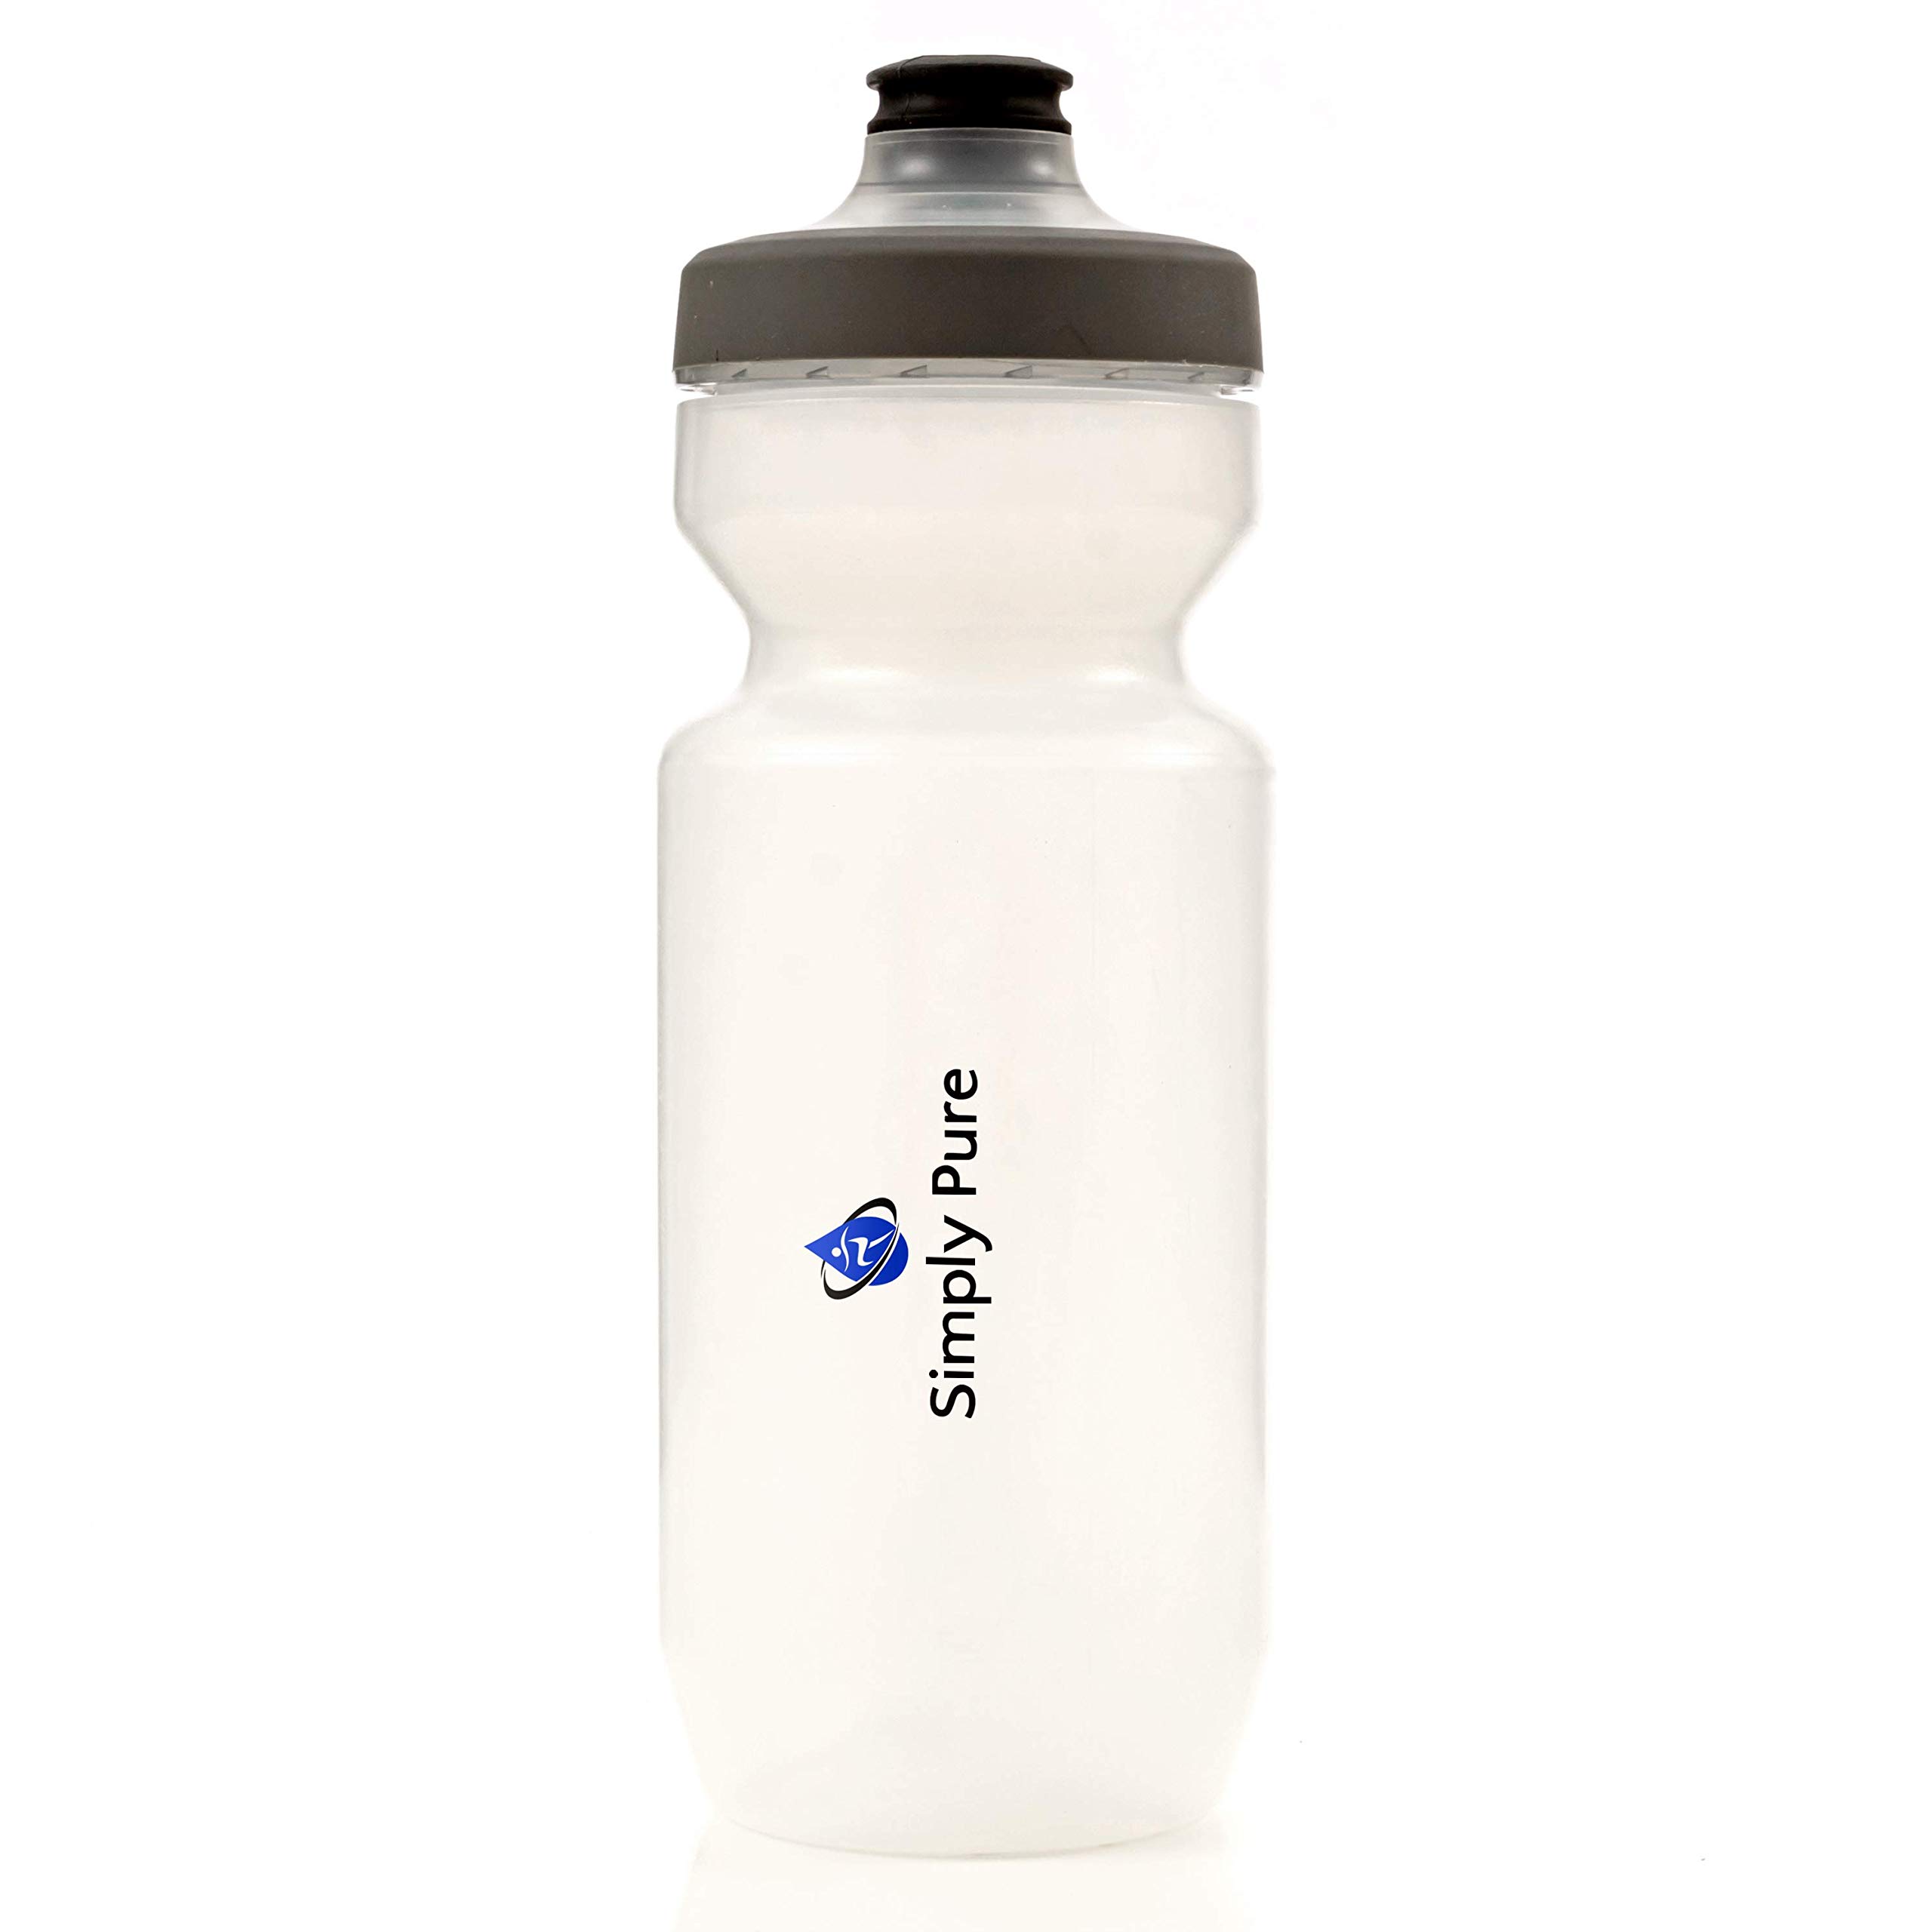 50 Strong Sports Squeeze Water Bottle Two Pack - 22 oz. Bottles